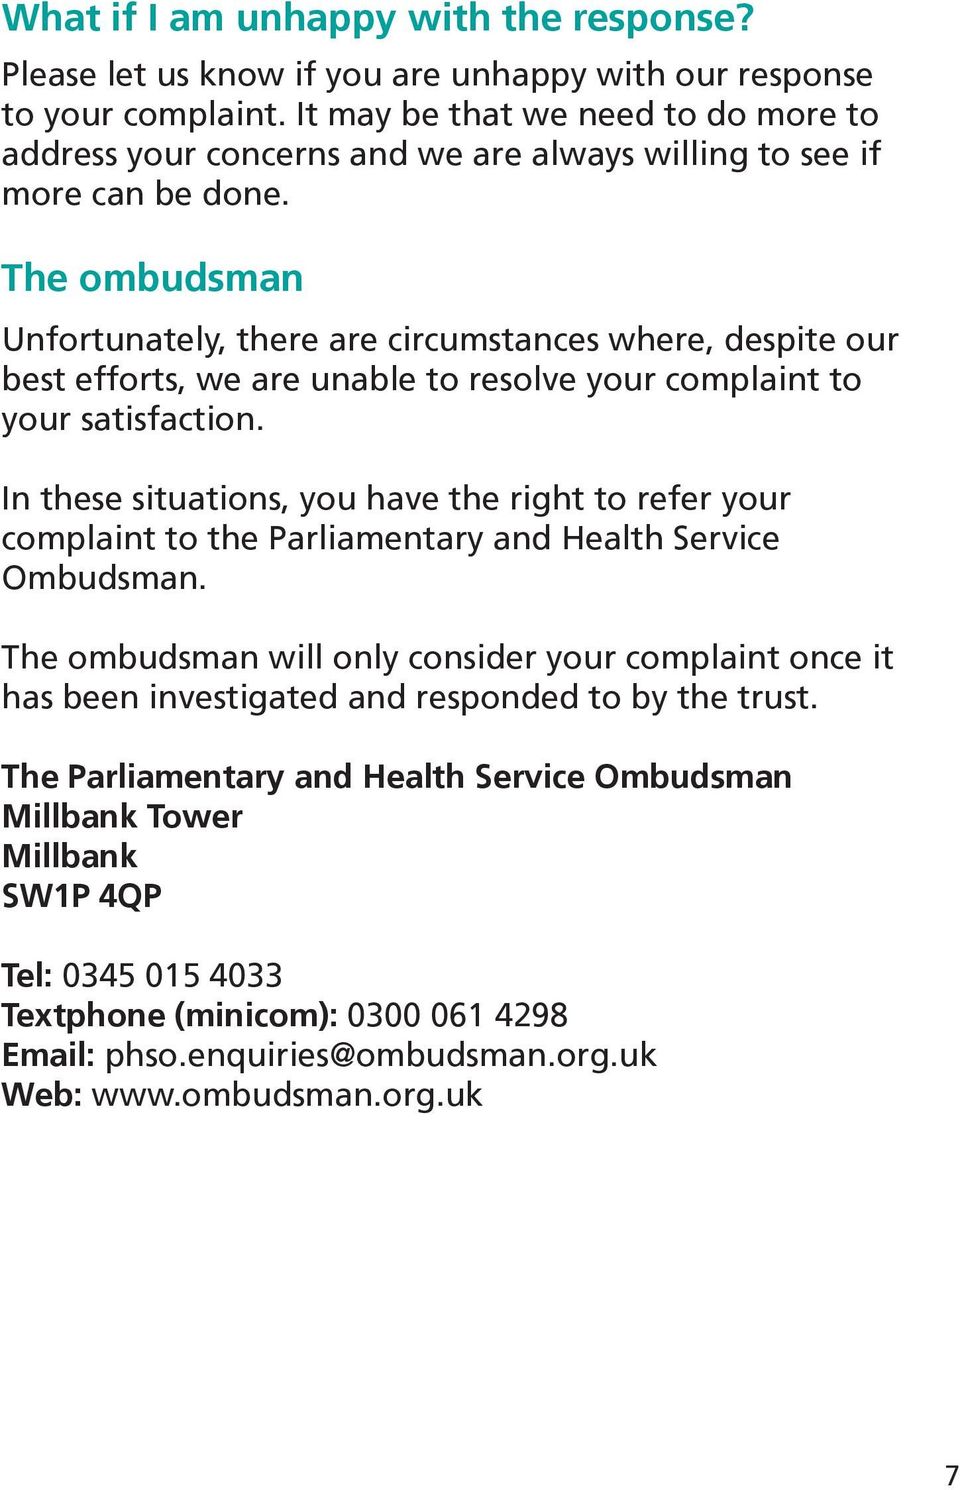 The ombudsman Unfortunately, there are circumstances where, despite our best efforts, we are unable to resolve your complaint to your satisfaction.